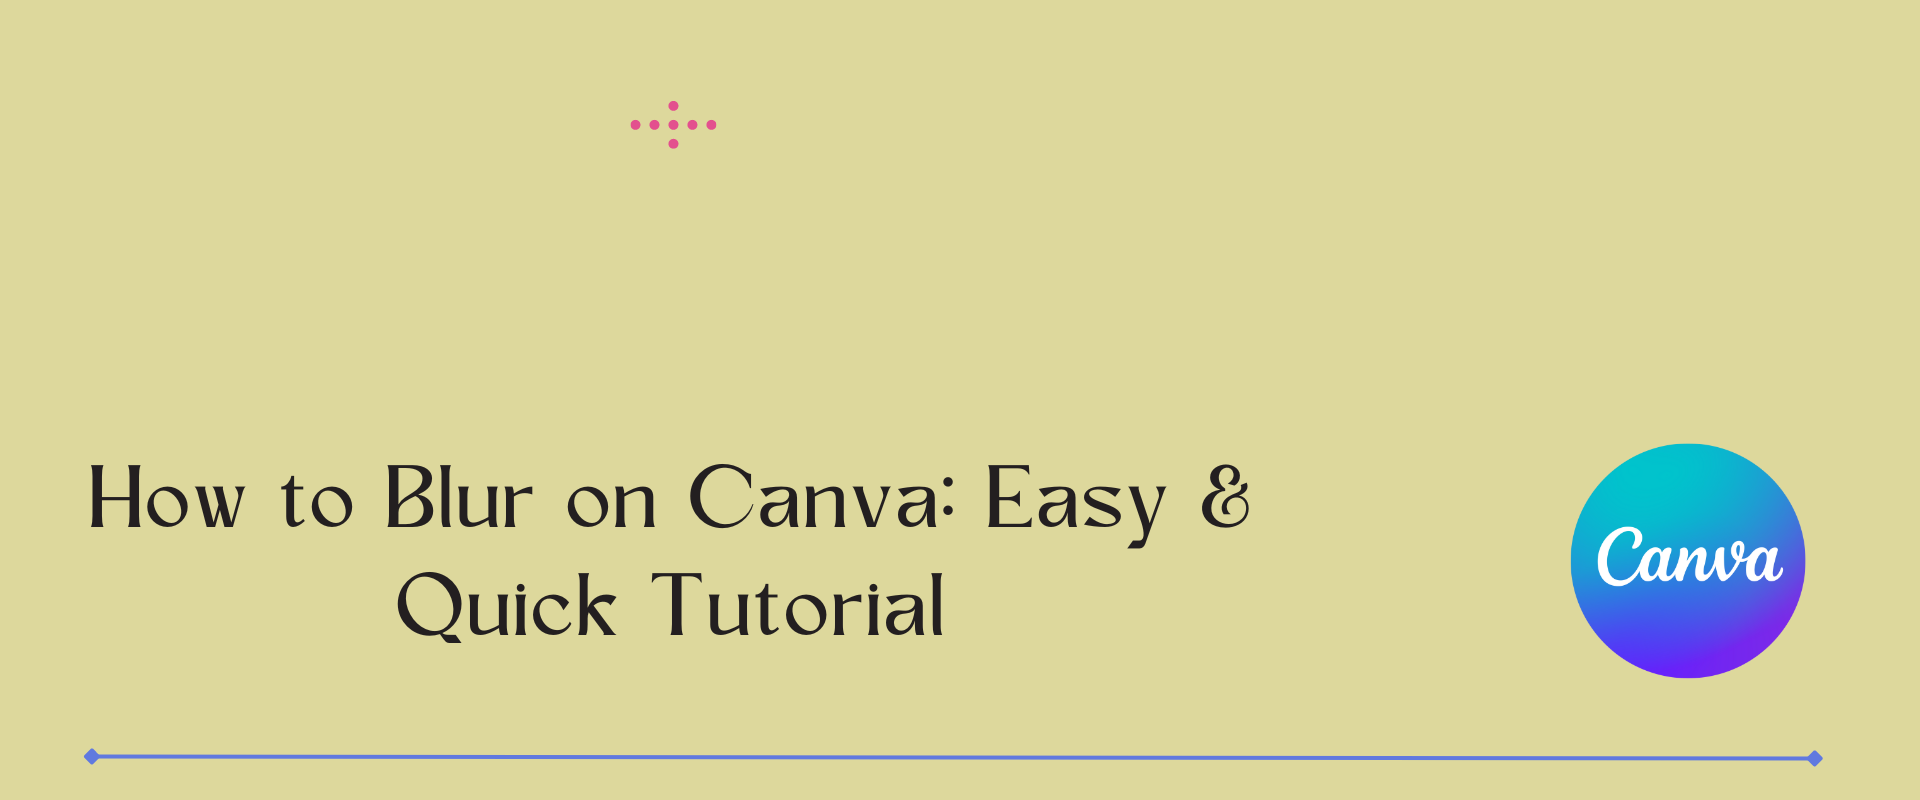 how to blur on canva